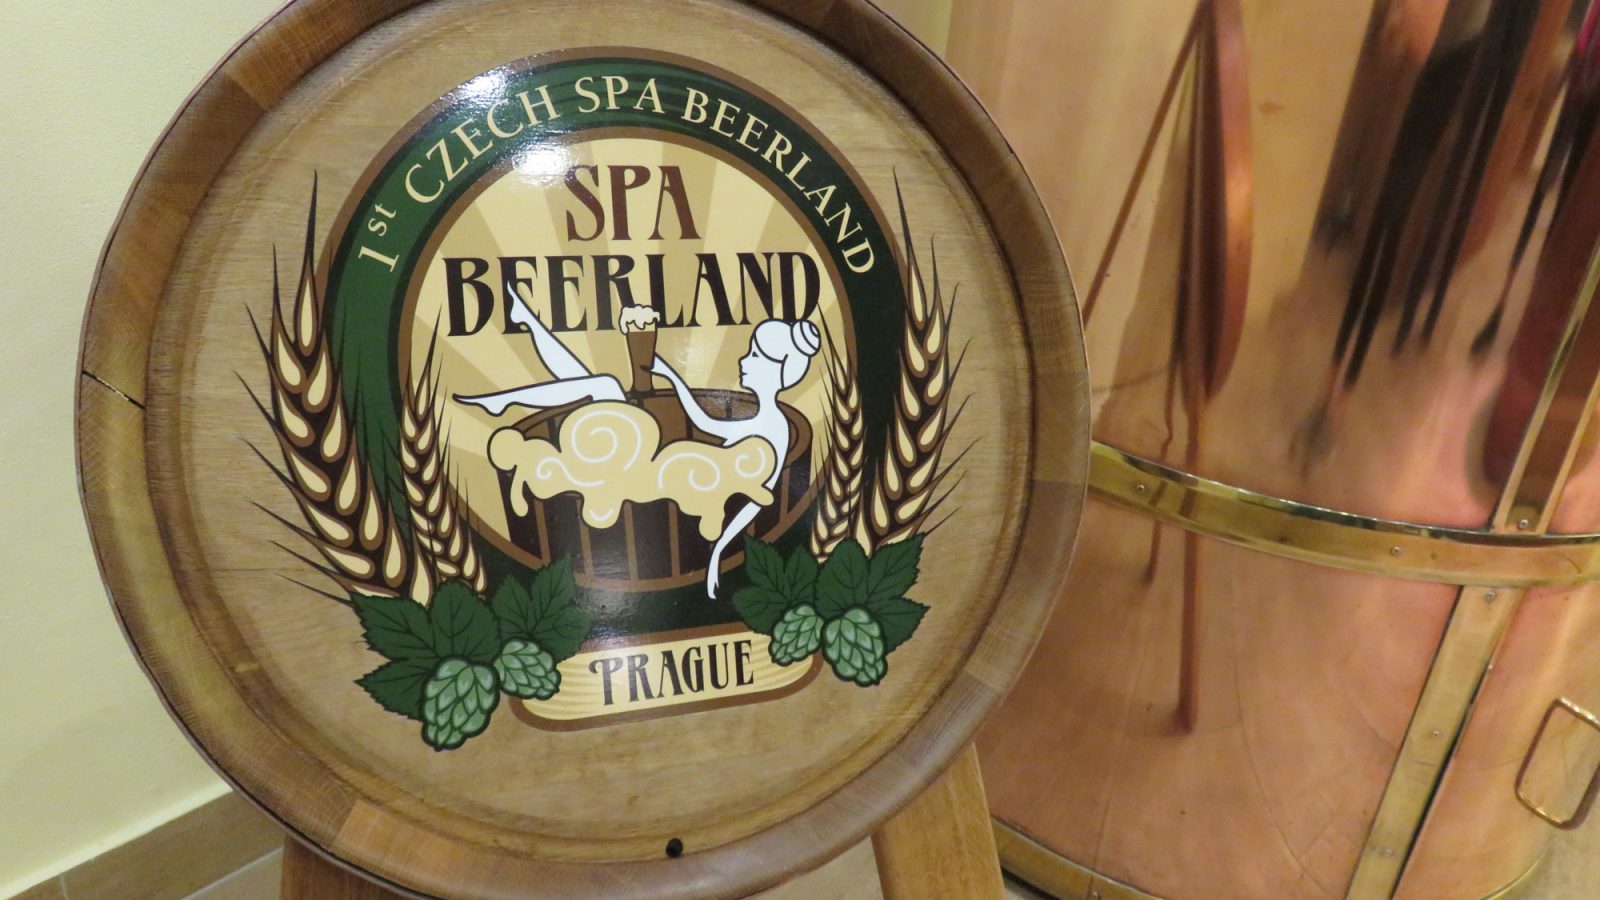 Visiting a Prague Beer Spa -- everything you need to know plus some stuff you don't on visiting these unique spas in the Czech Republic